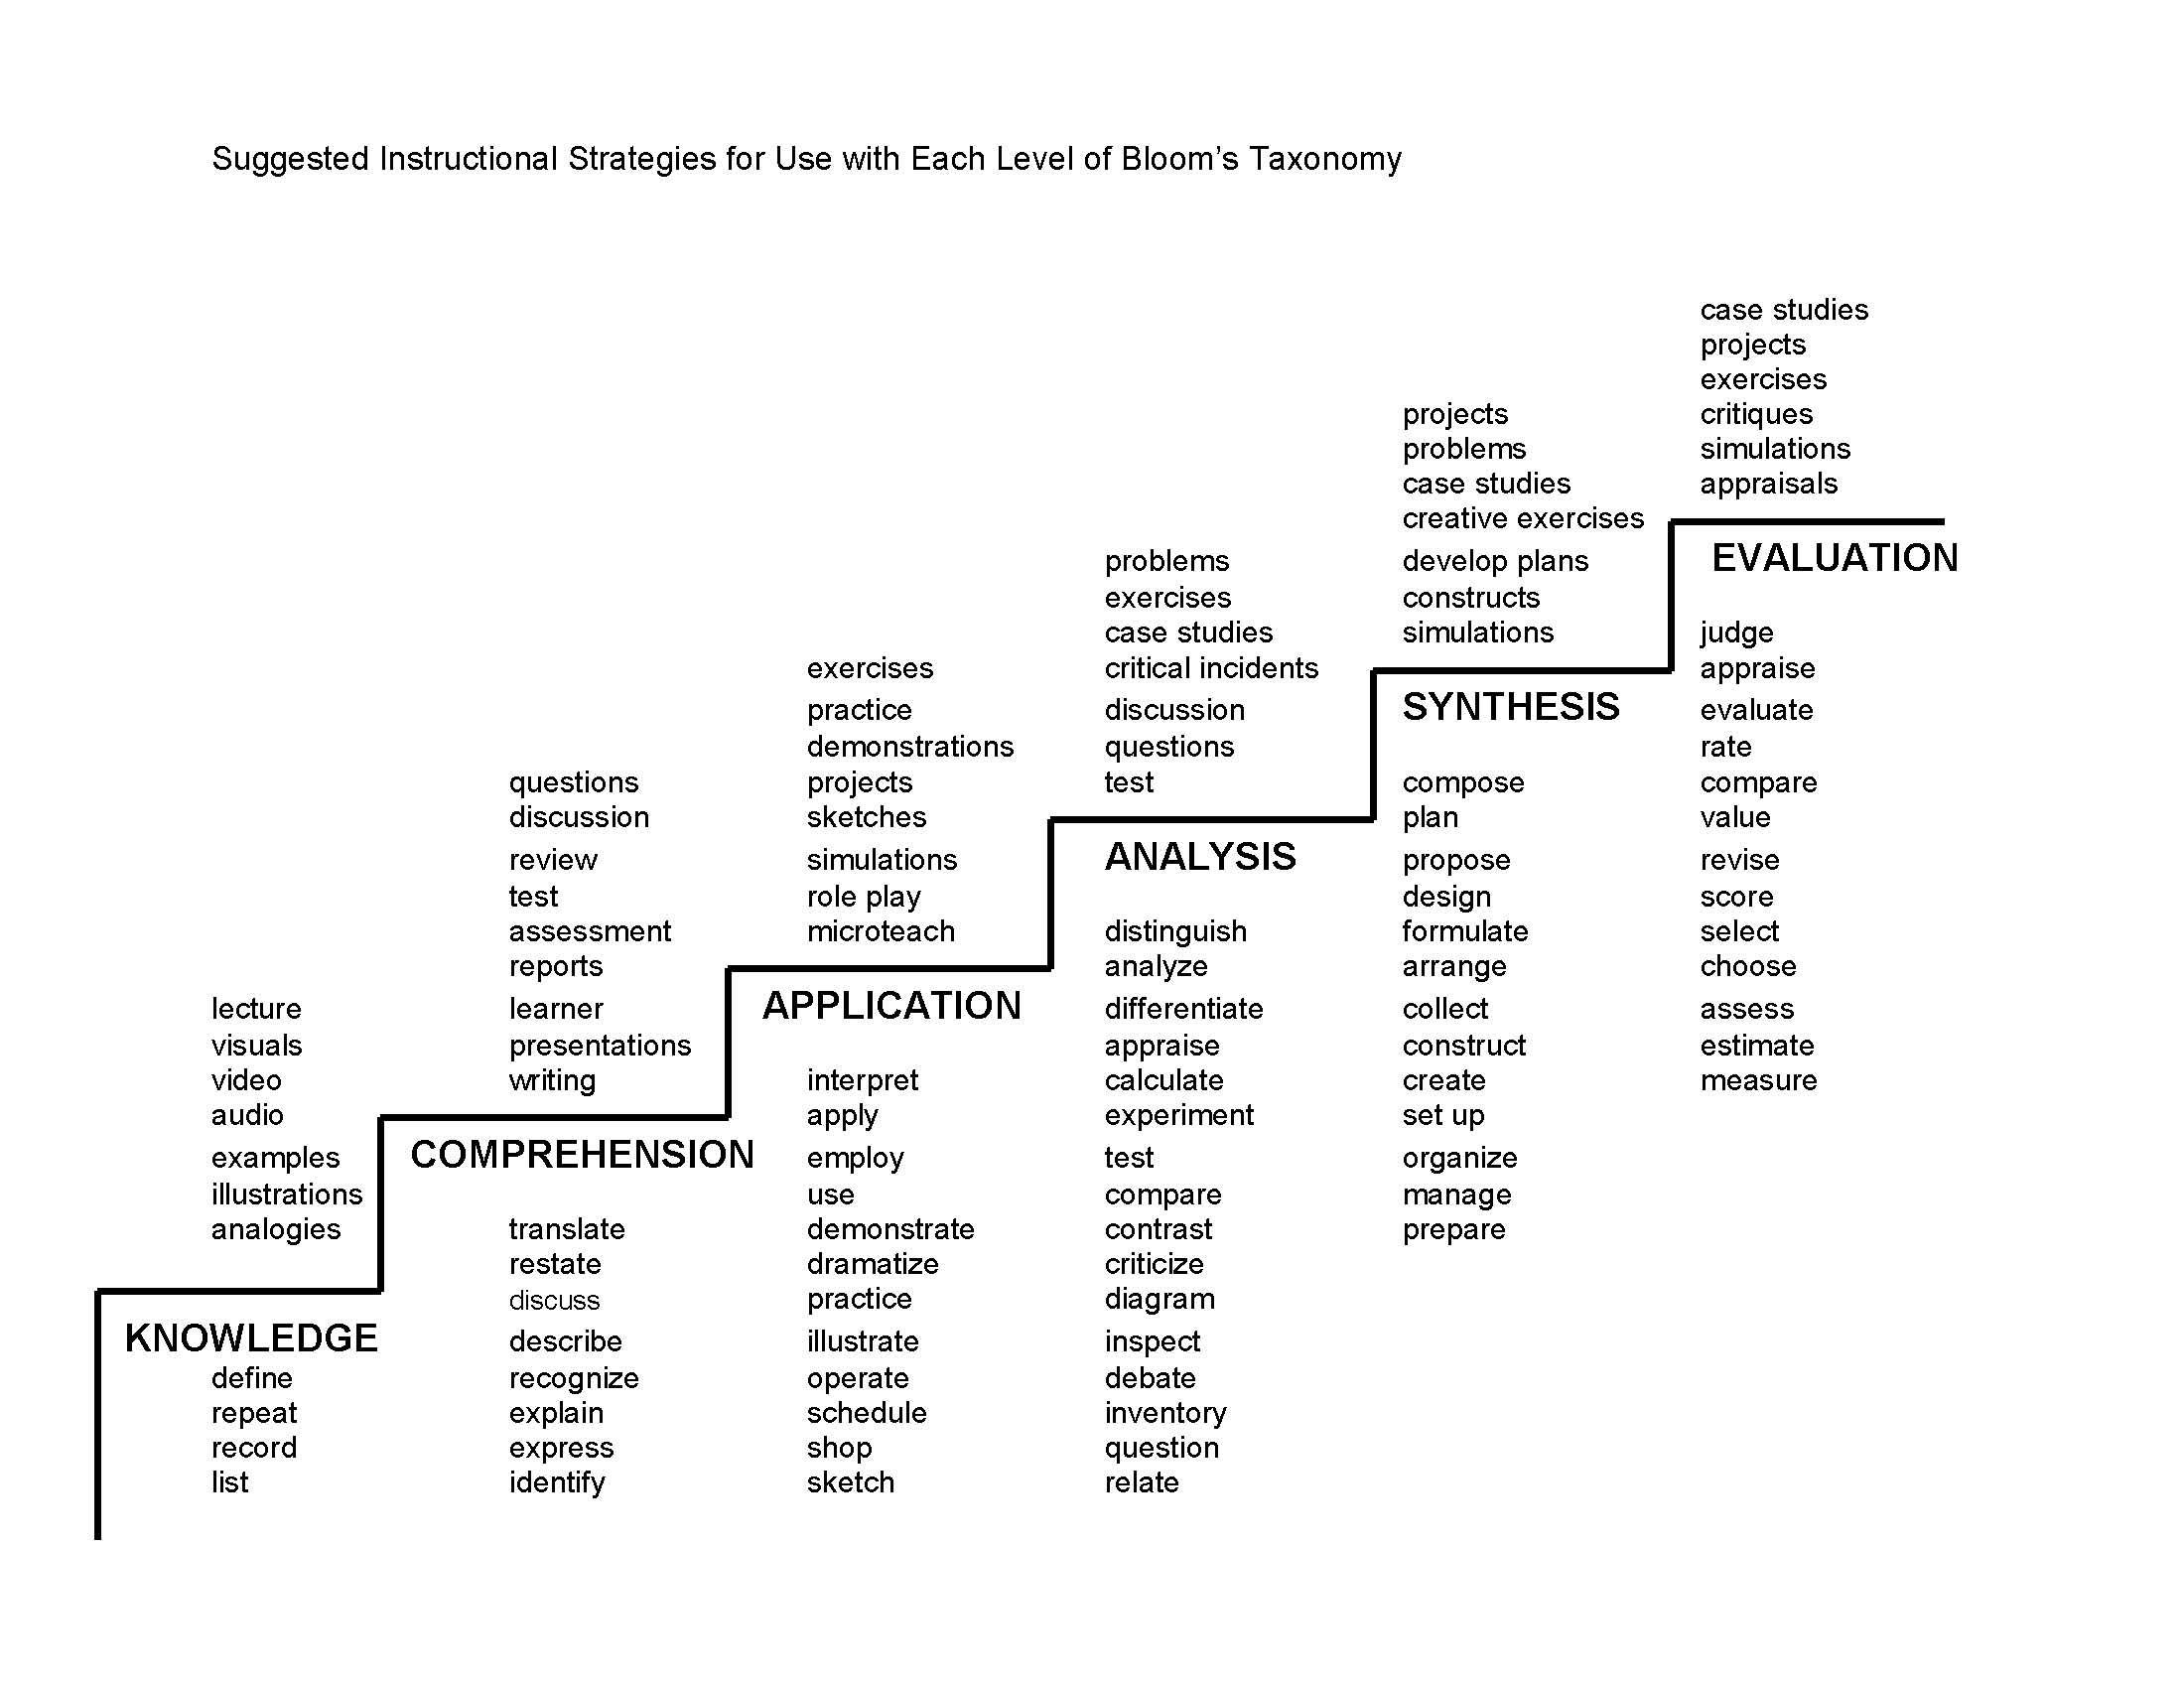 Bloom's Taxonomy staircase indicating the cognitive levels and corresponding activities